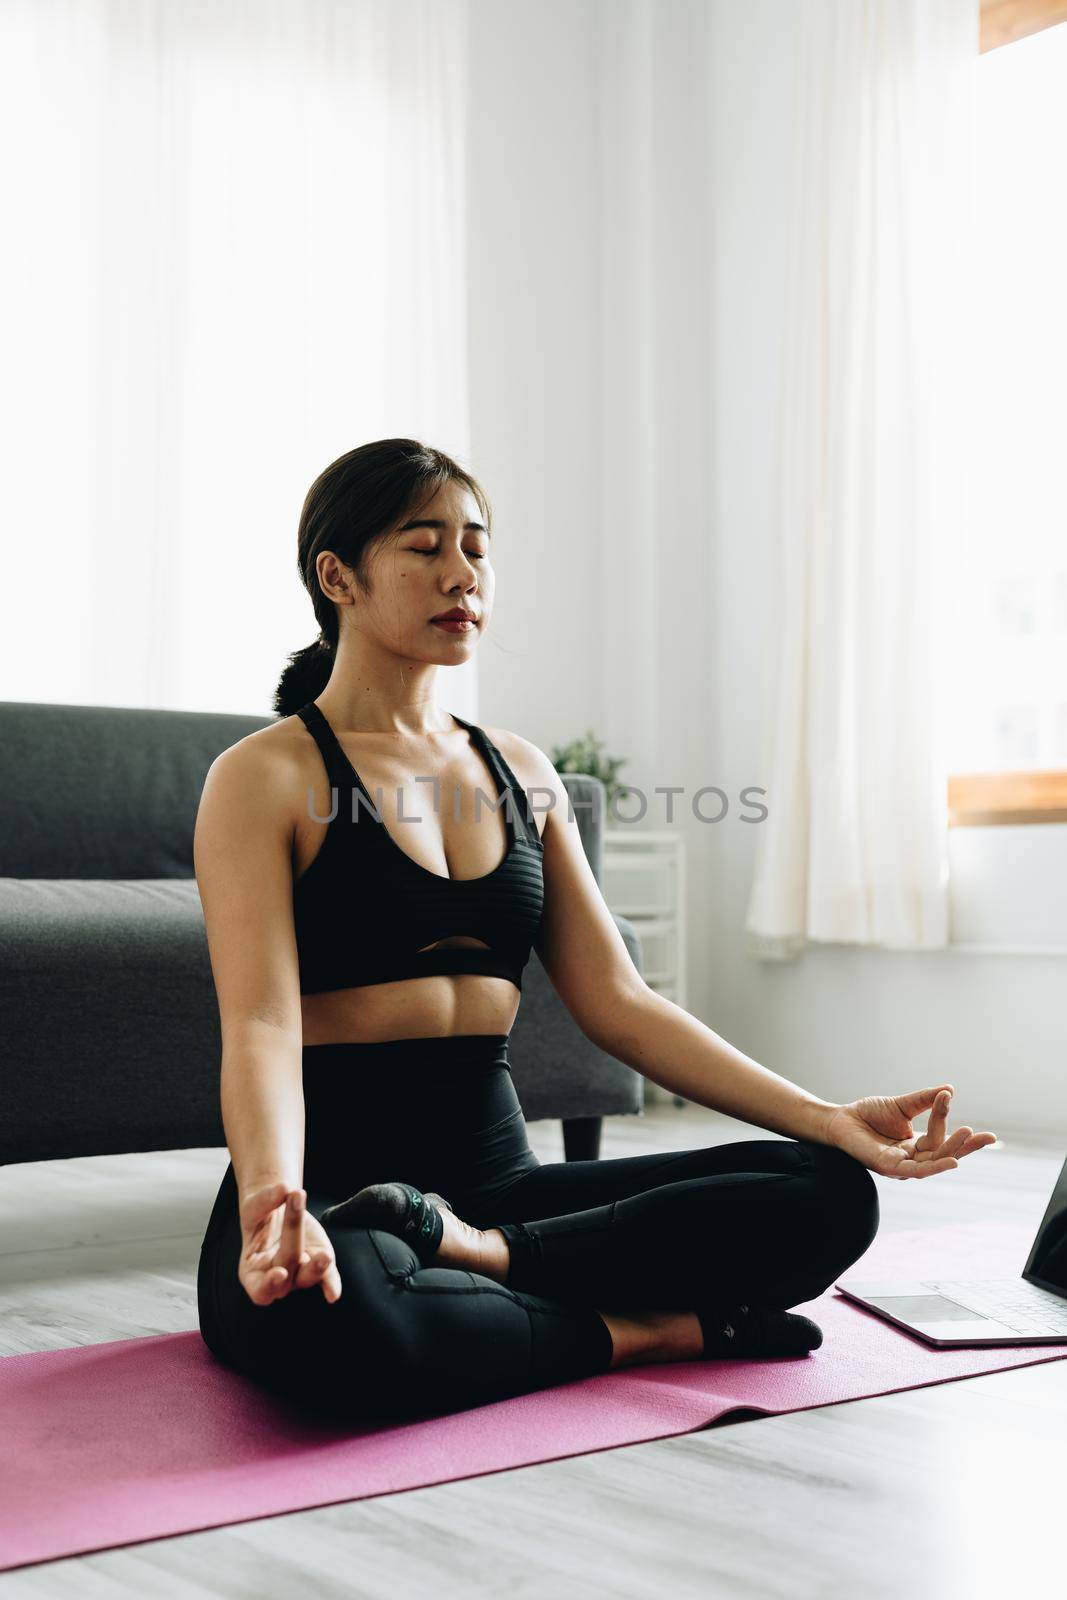 Young happy beautiful woman practicing yoga at home sitting in lotus pose on yoga mat meditating smiling relaxed. Mindfulness meditation concept.